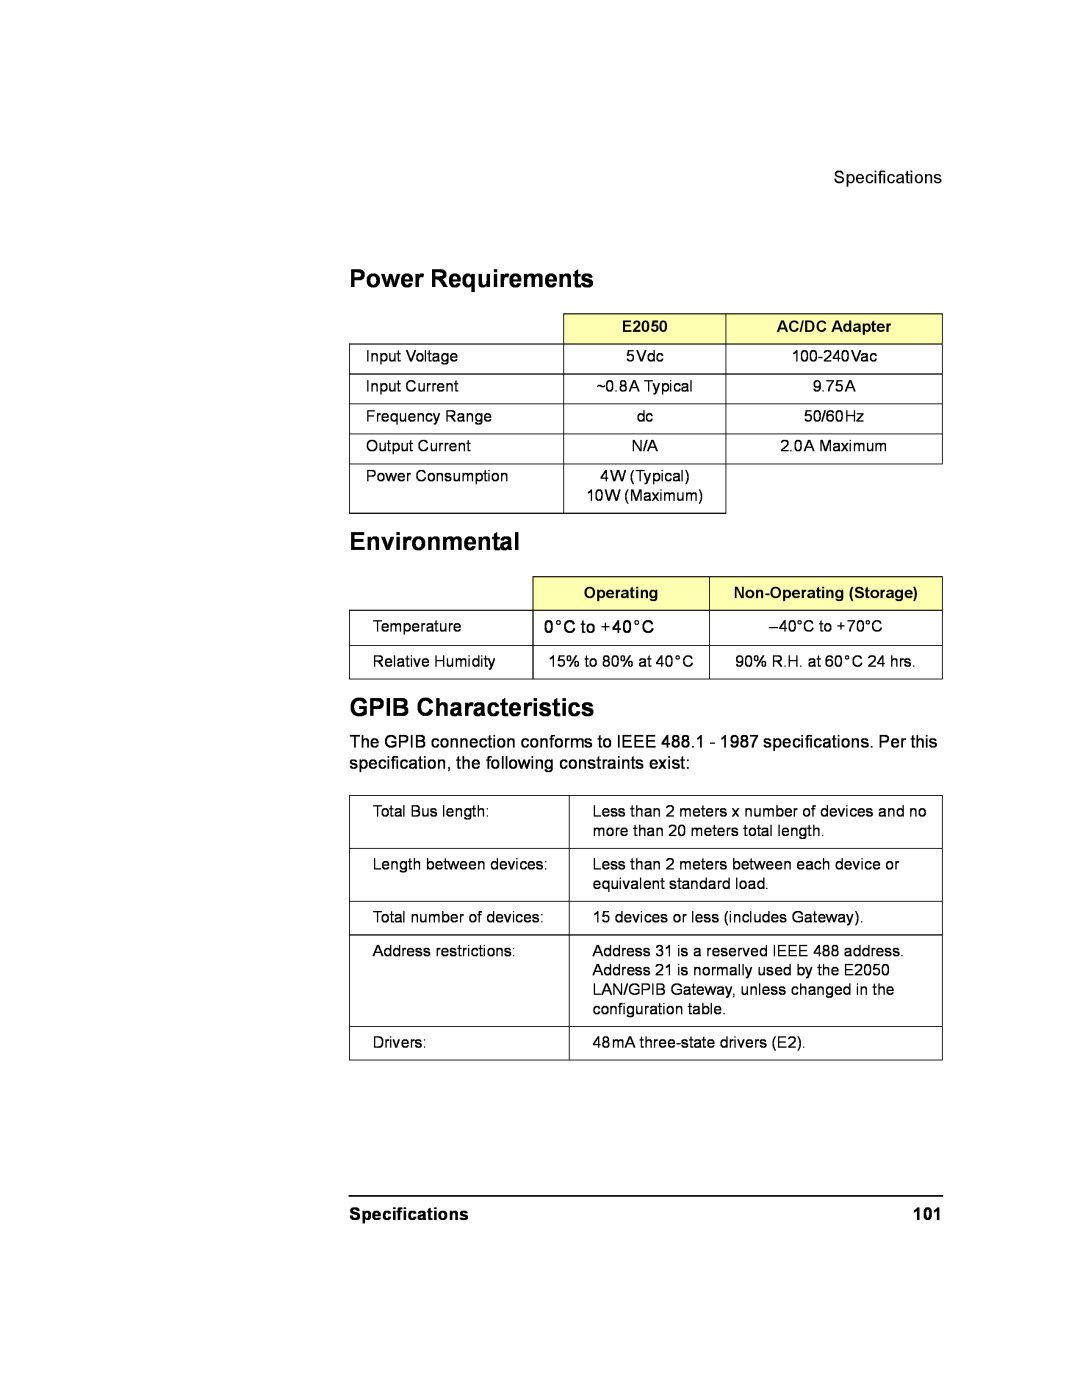 Agilent Technologies E2050-90003 manual Power Requirements, Environmental, GPIB Characteristics, Specifications, 0C to +40C 